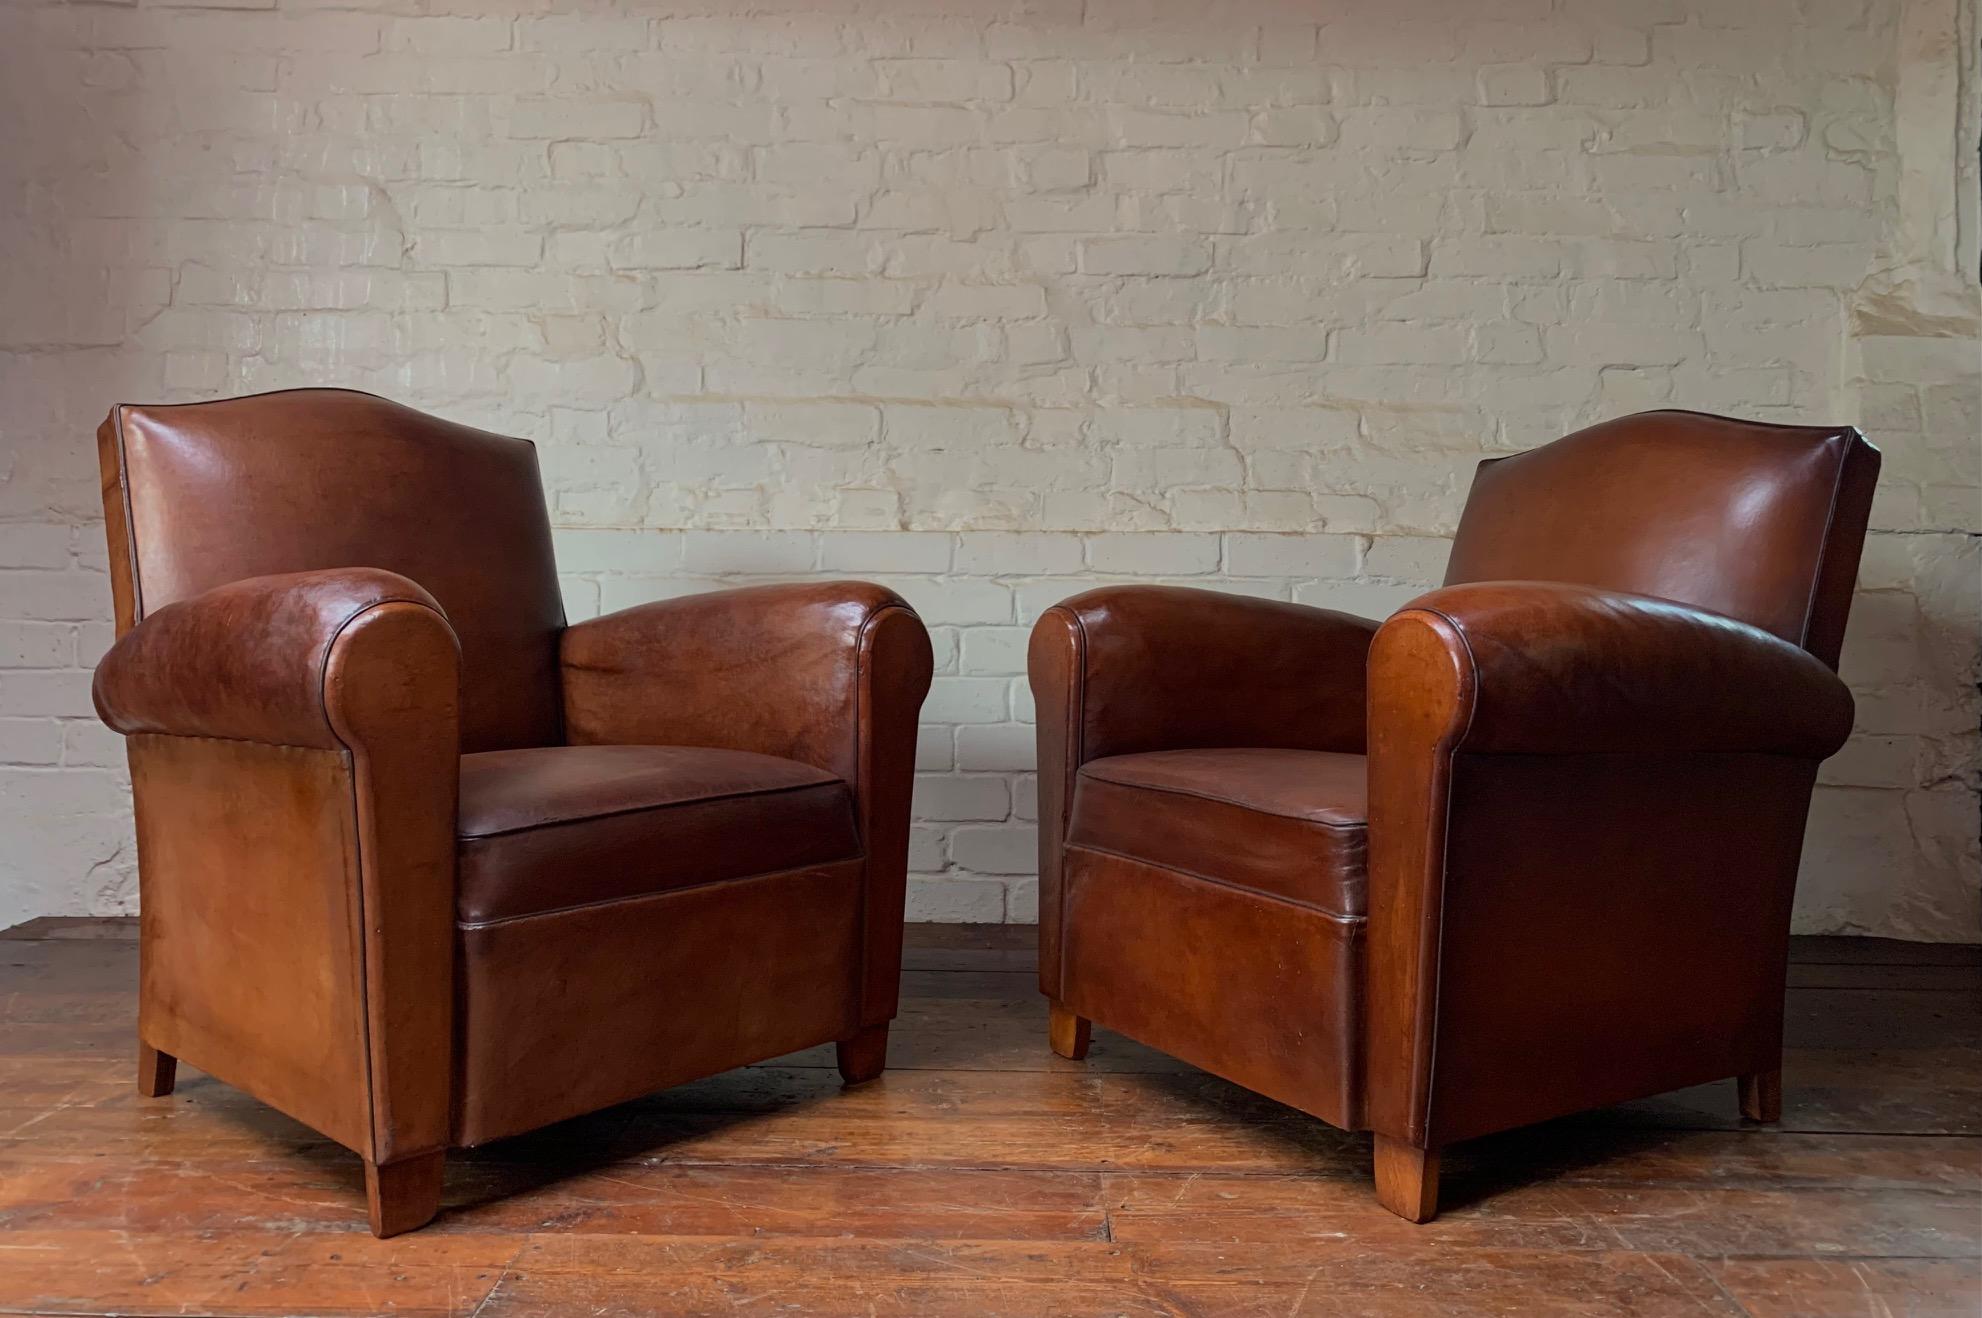 These are beautiful chairs. The original Havana brown leather has aged perfectly. After being cleaned and nourished the leather has revealed a gorgeous patina of lighter brown and chestnut. The condition of these chairs are almost perfect and the